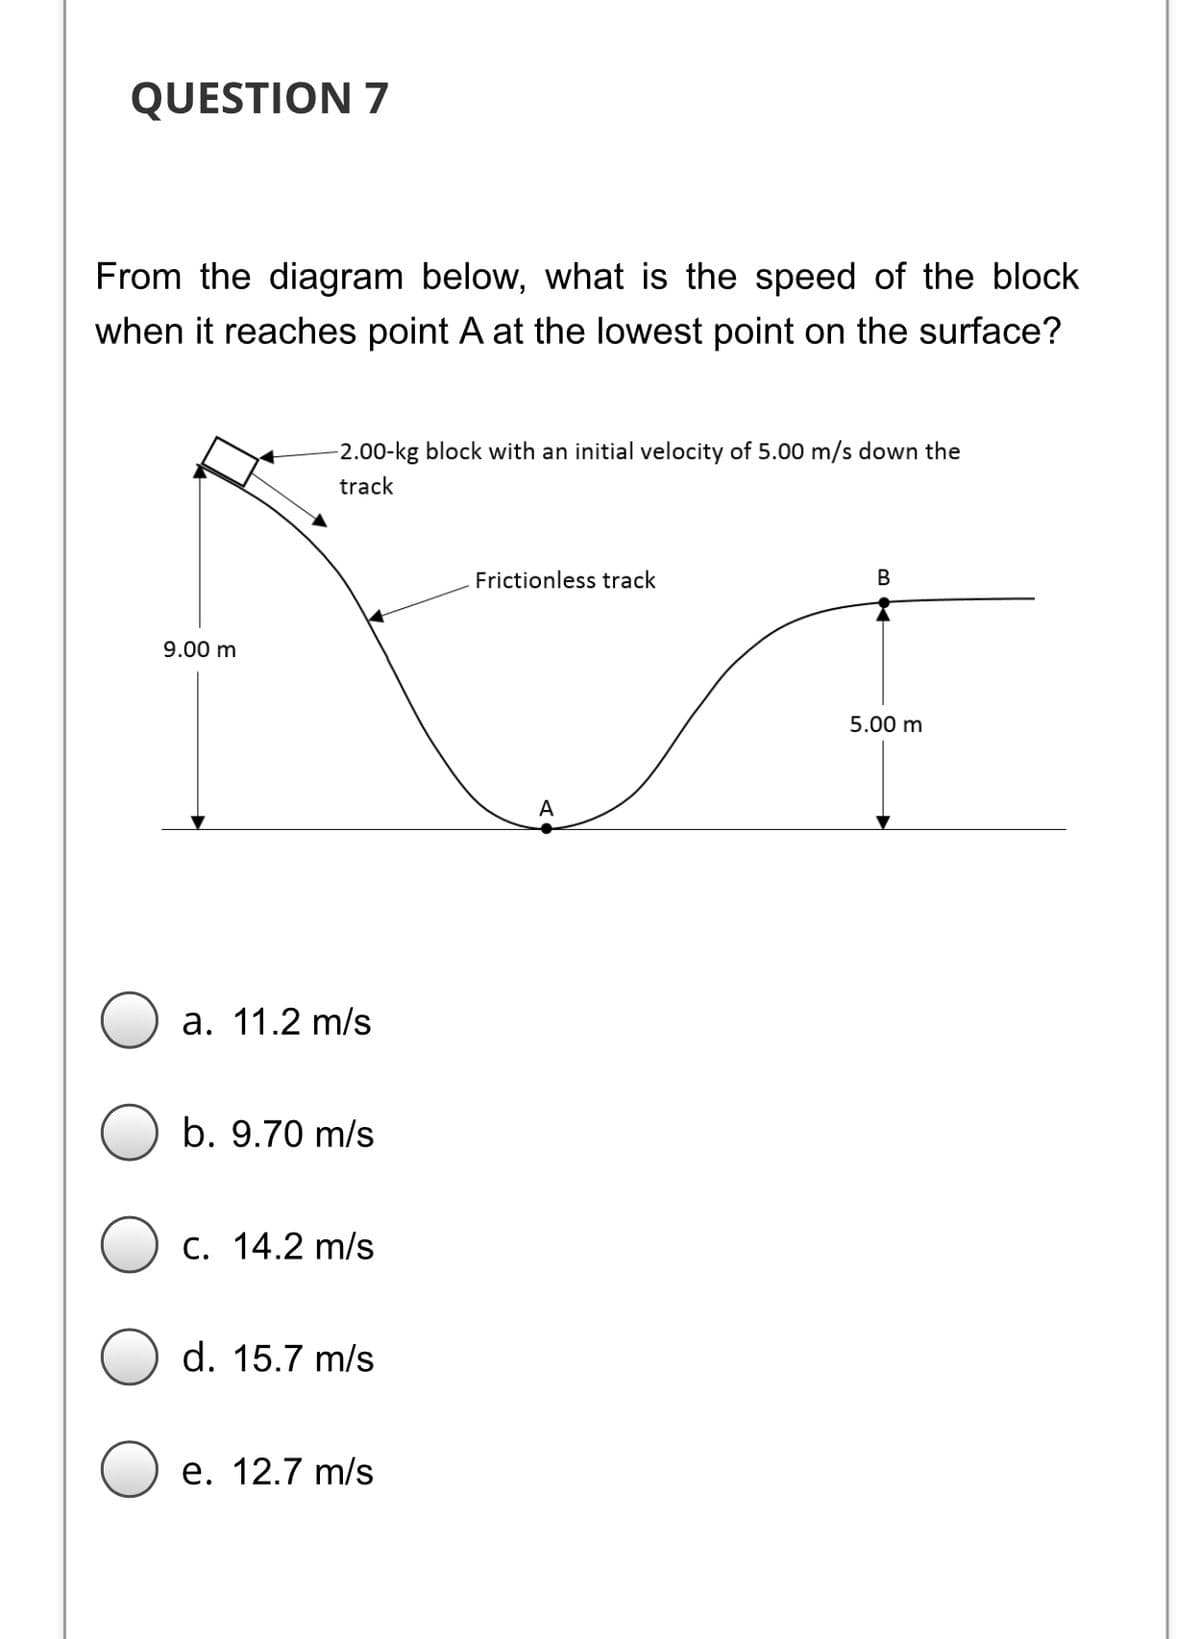 QUESTION 7
From the diagram below, what is the speed of the block
when it reaches point A at the lowest point on the surface?
2.00-kg block with an initial velocity of 5.00 m/s down the
track
Frictionless track
В
9.00 m
5.00 m
A
a. 11.2 m/s
b. 9.70 m/s
C. 14.2 m/s
d. 15.7 m/s
е. 12.7 m/s
